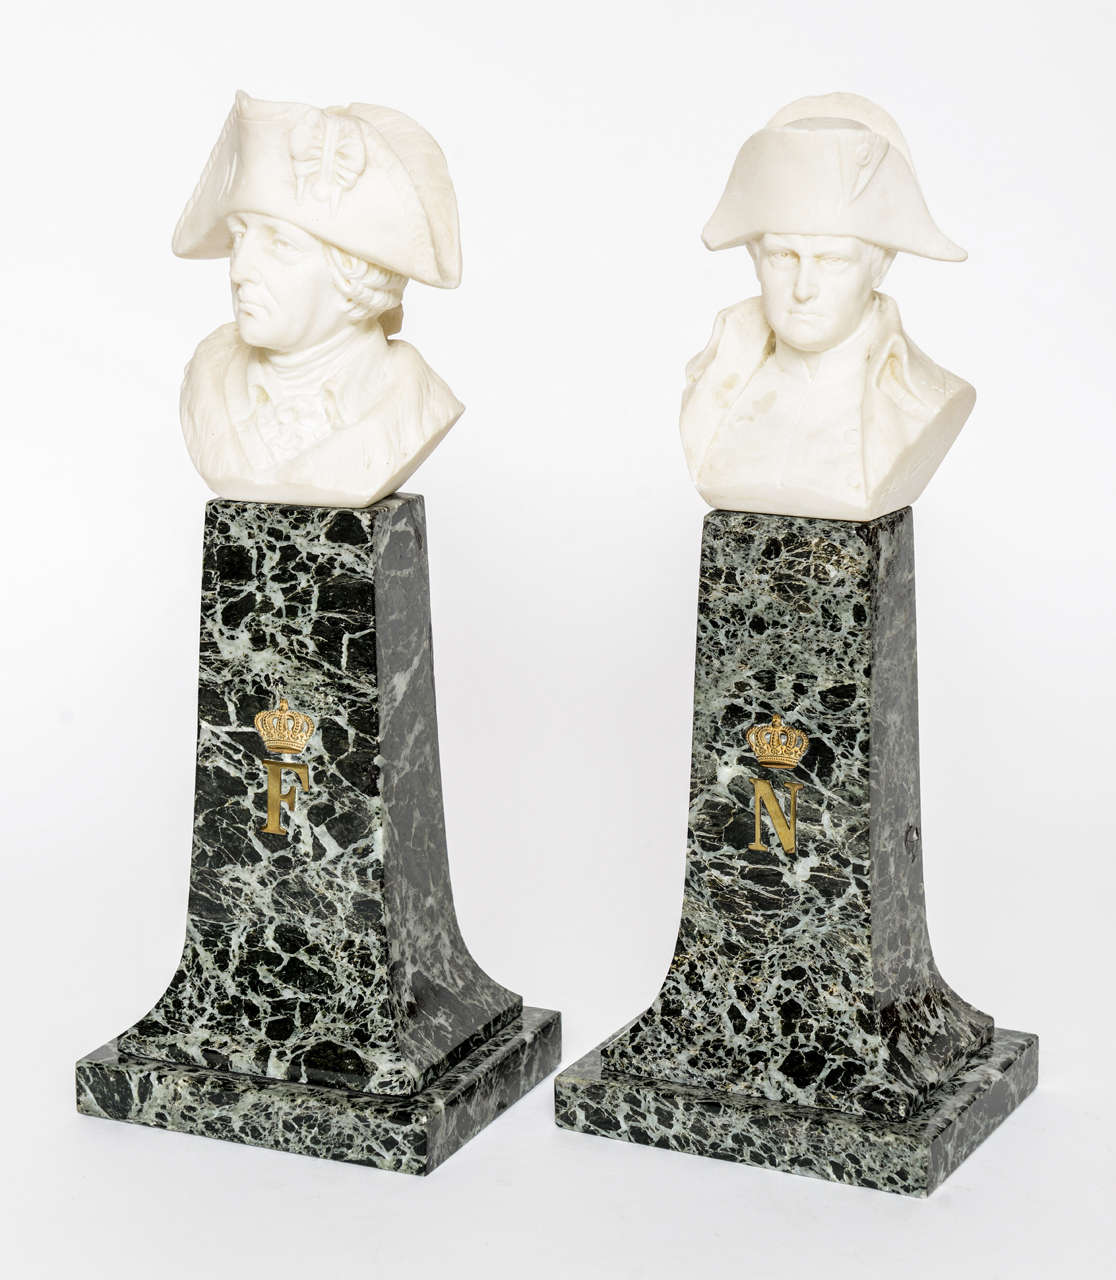 The alabaster busts, over a serpentine marble base with bronze doré mounts